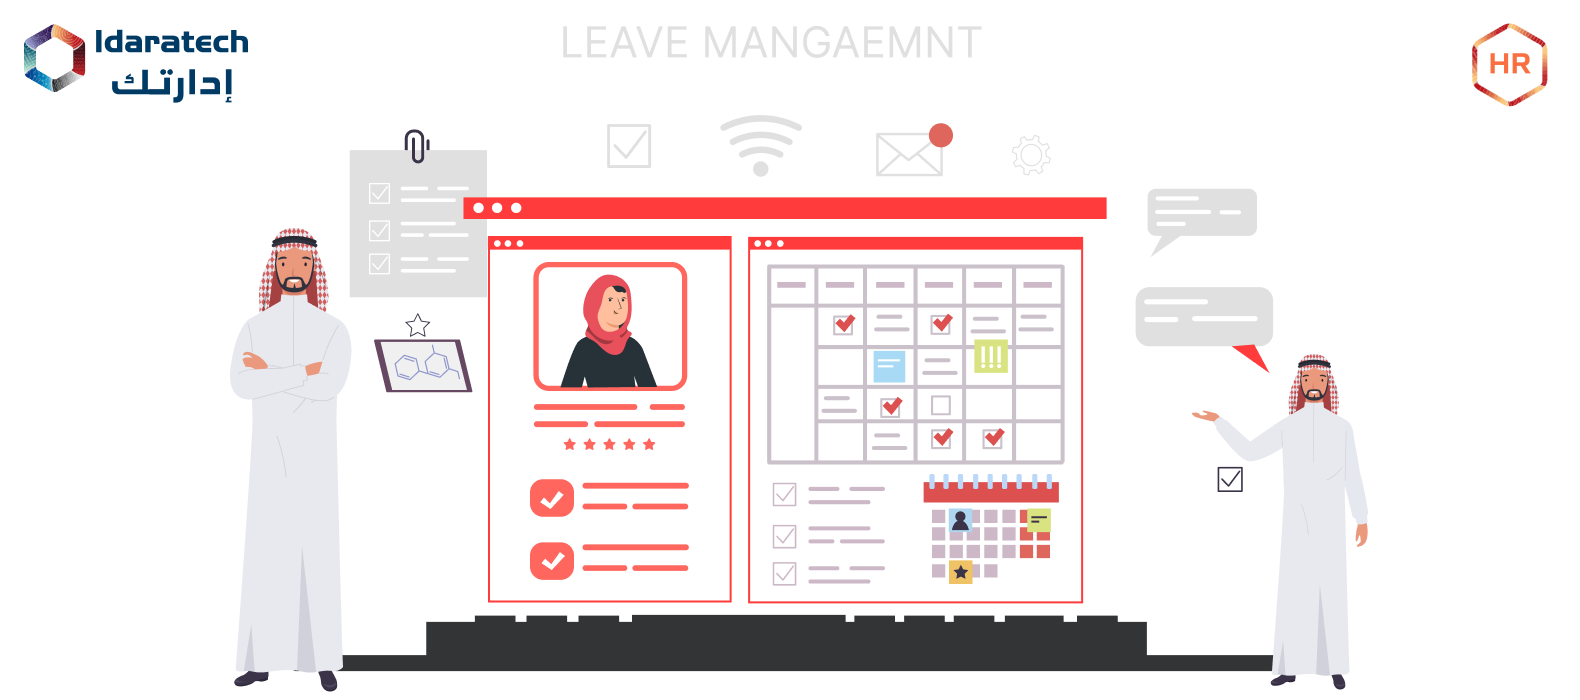 The Ultimate Guide to Effective Leave Management Solutions